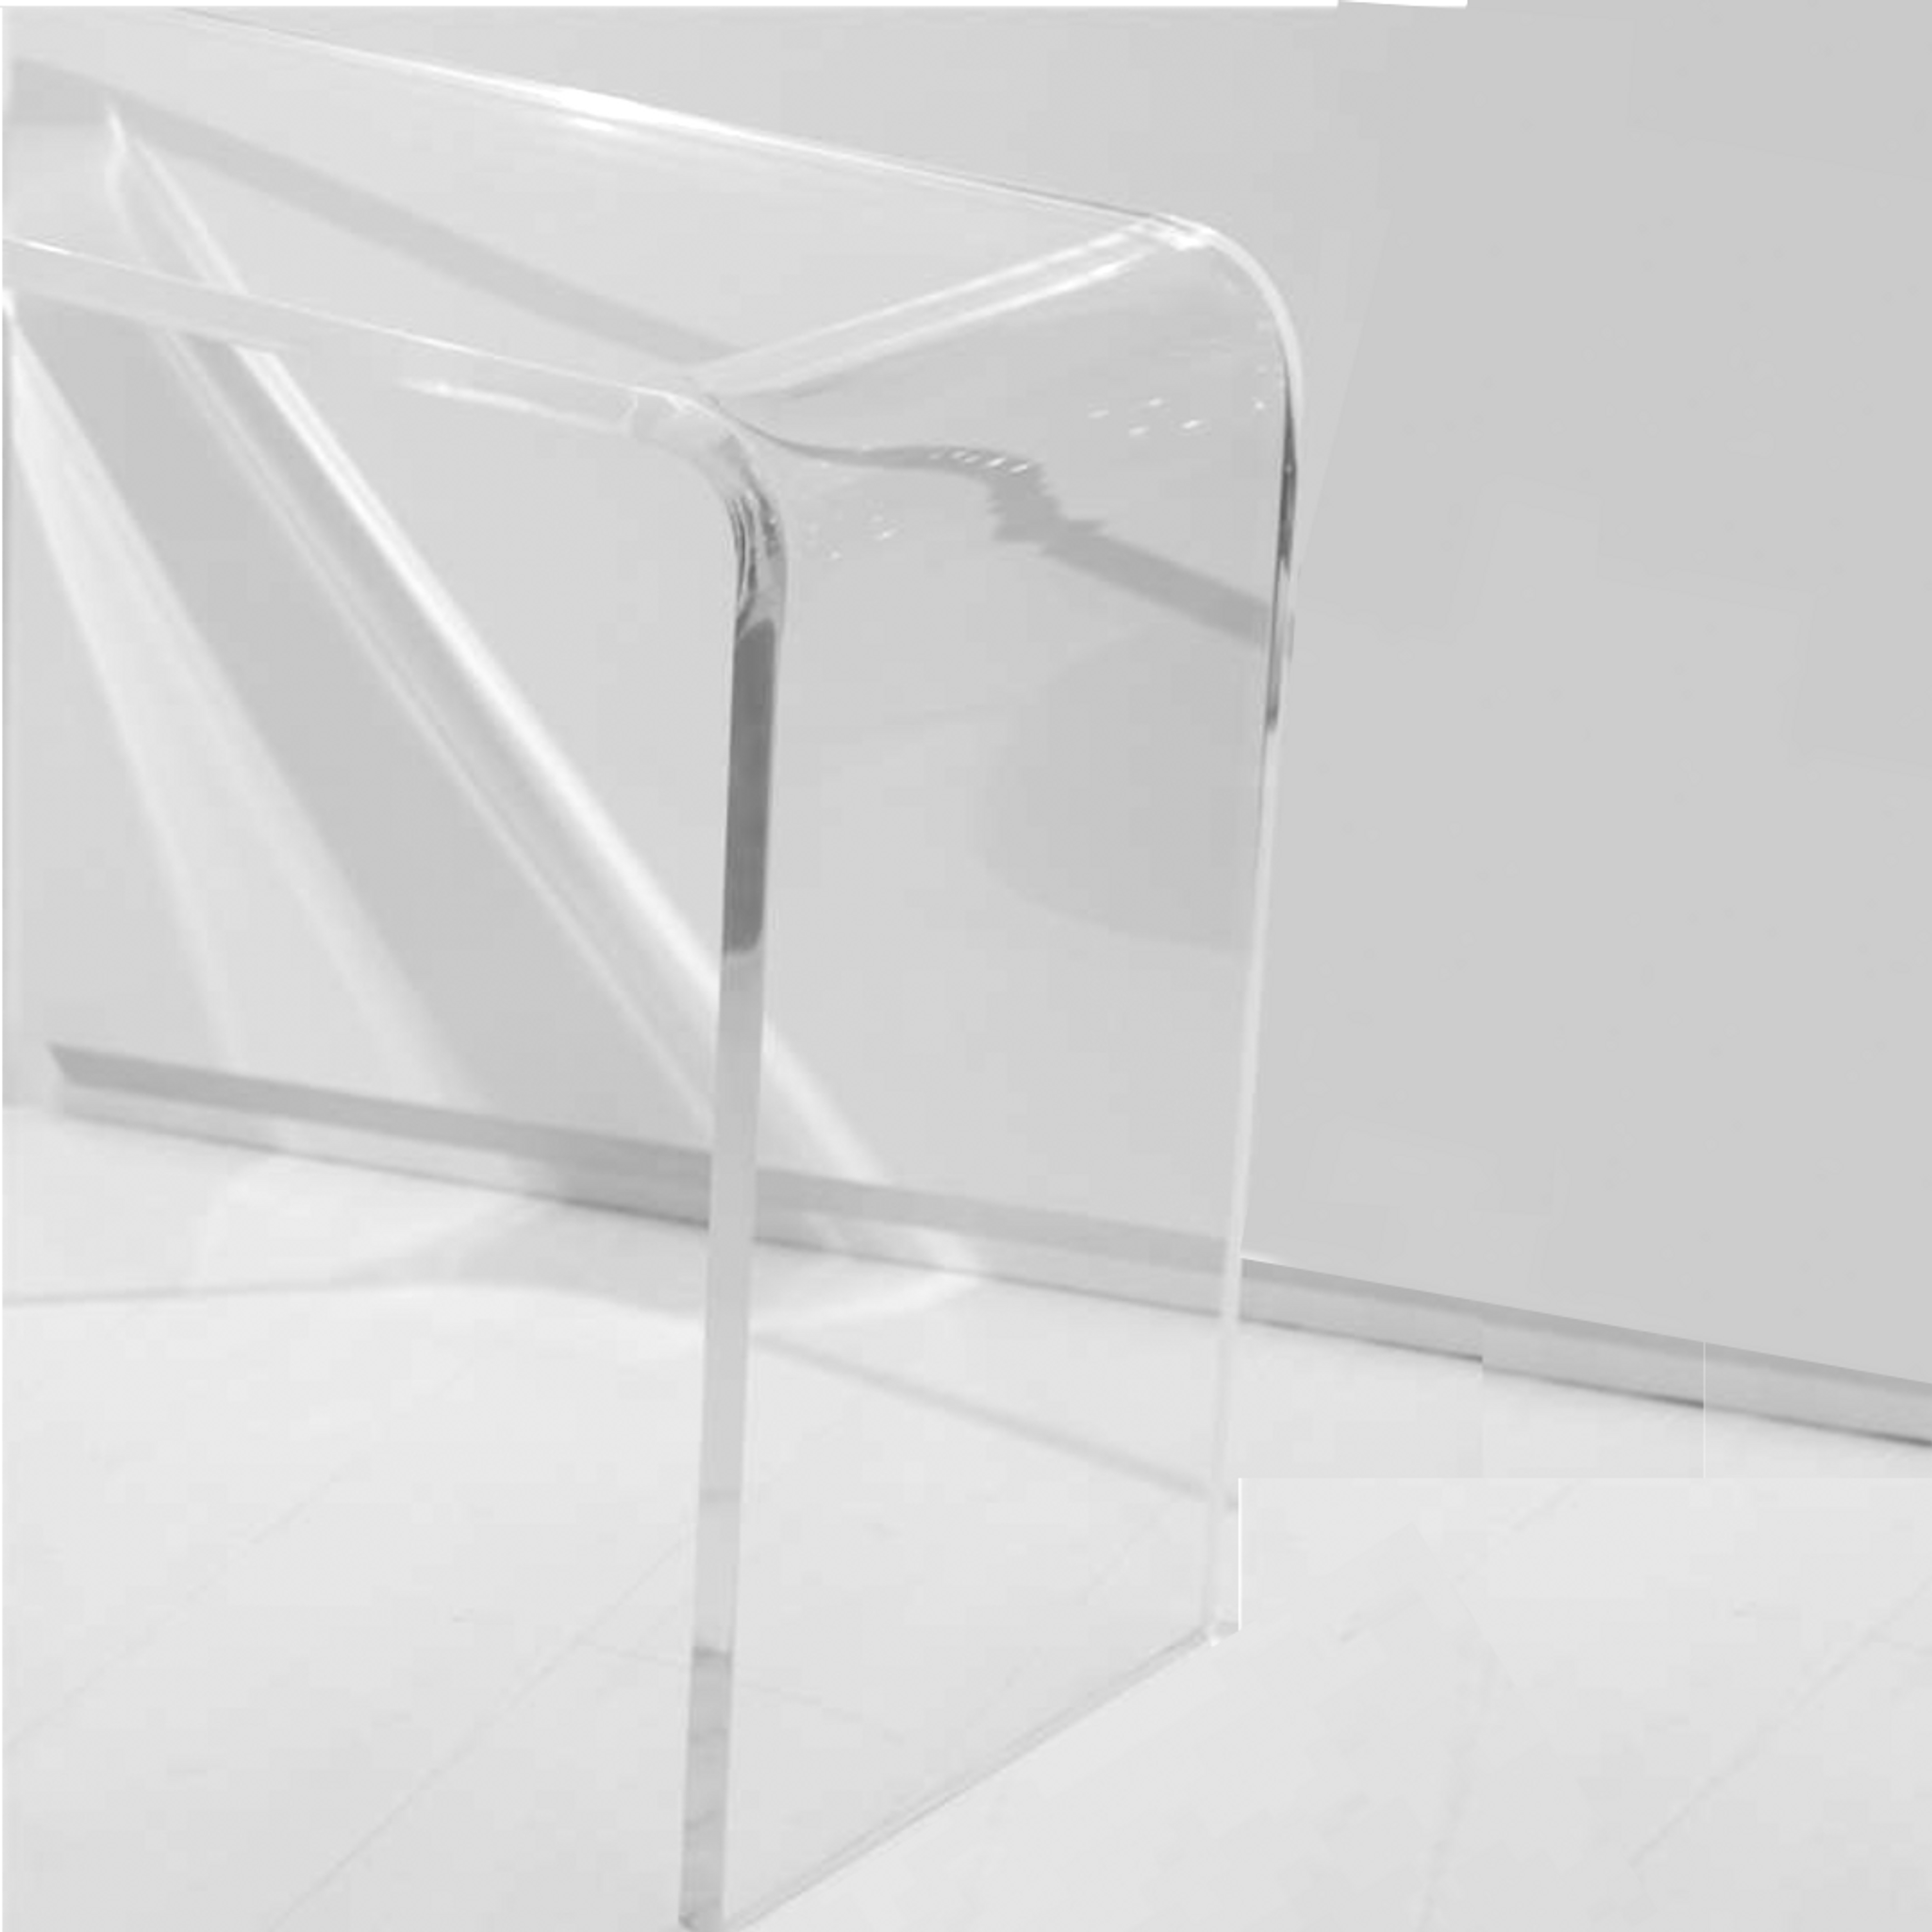 clear acrylic lucite waterfall console table thick sturdy best